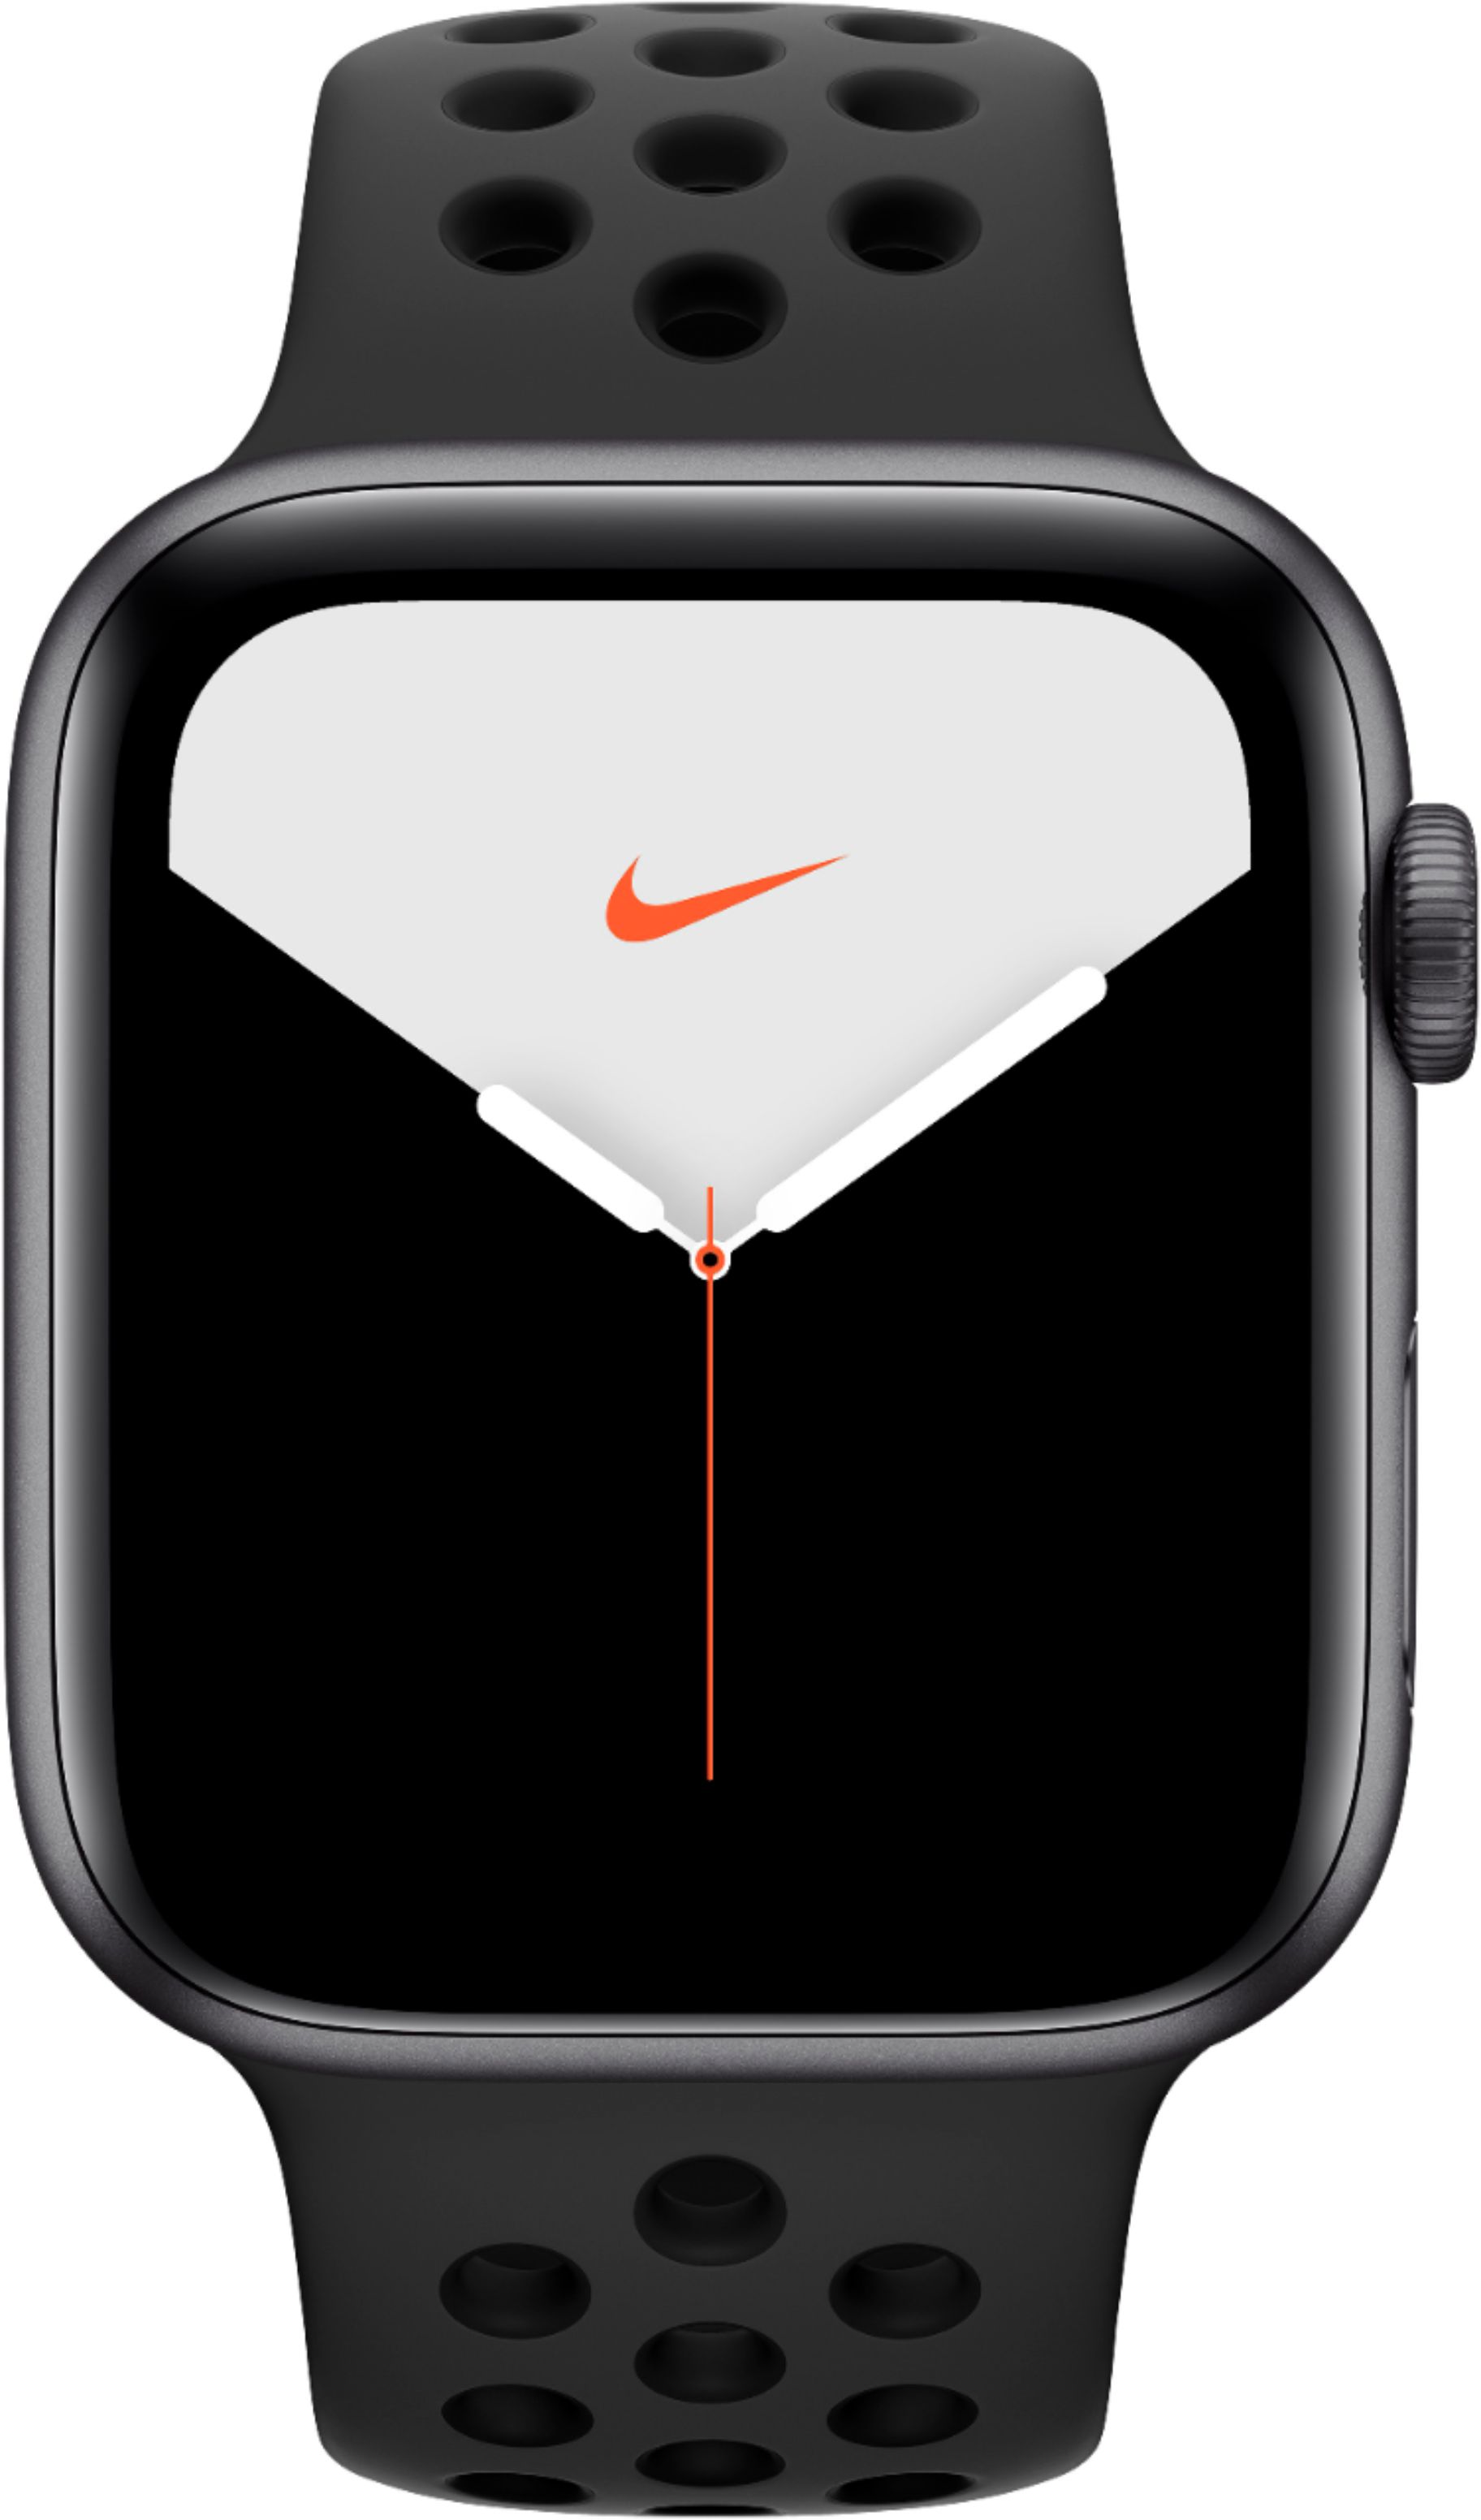 Apple Watch Nike+ hits stores October 5 with new face and reflective band